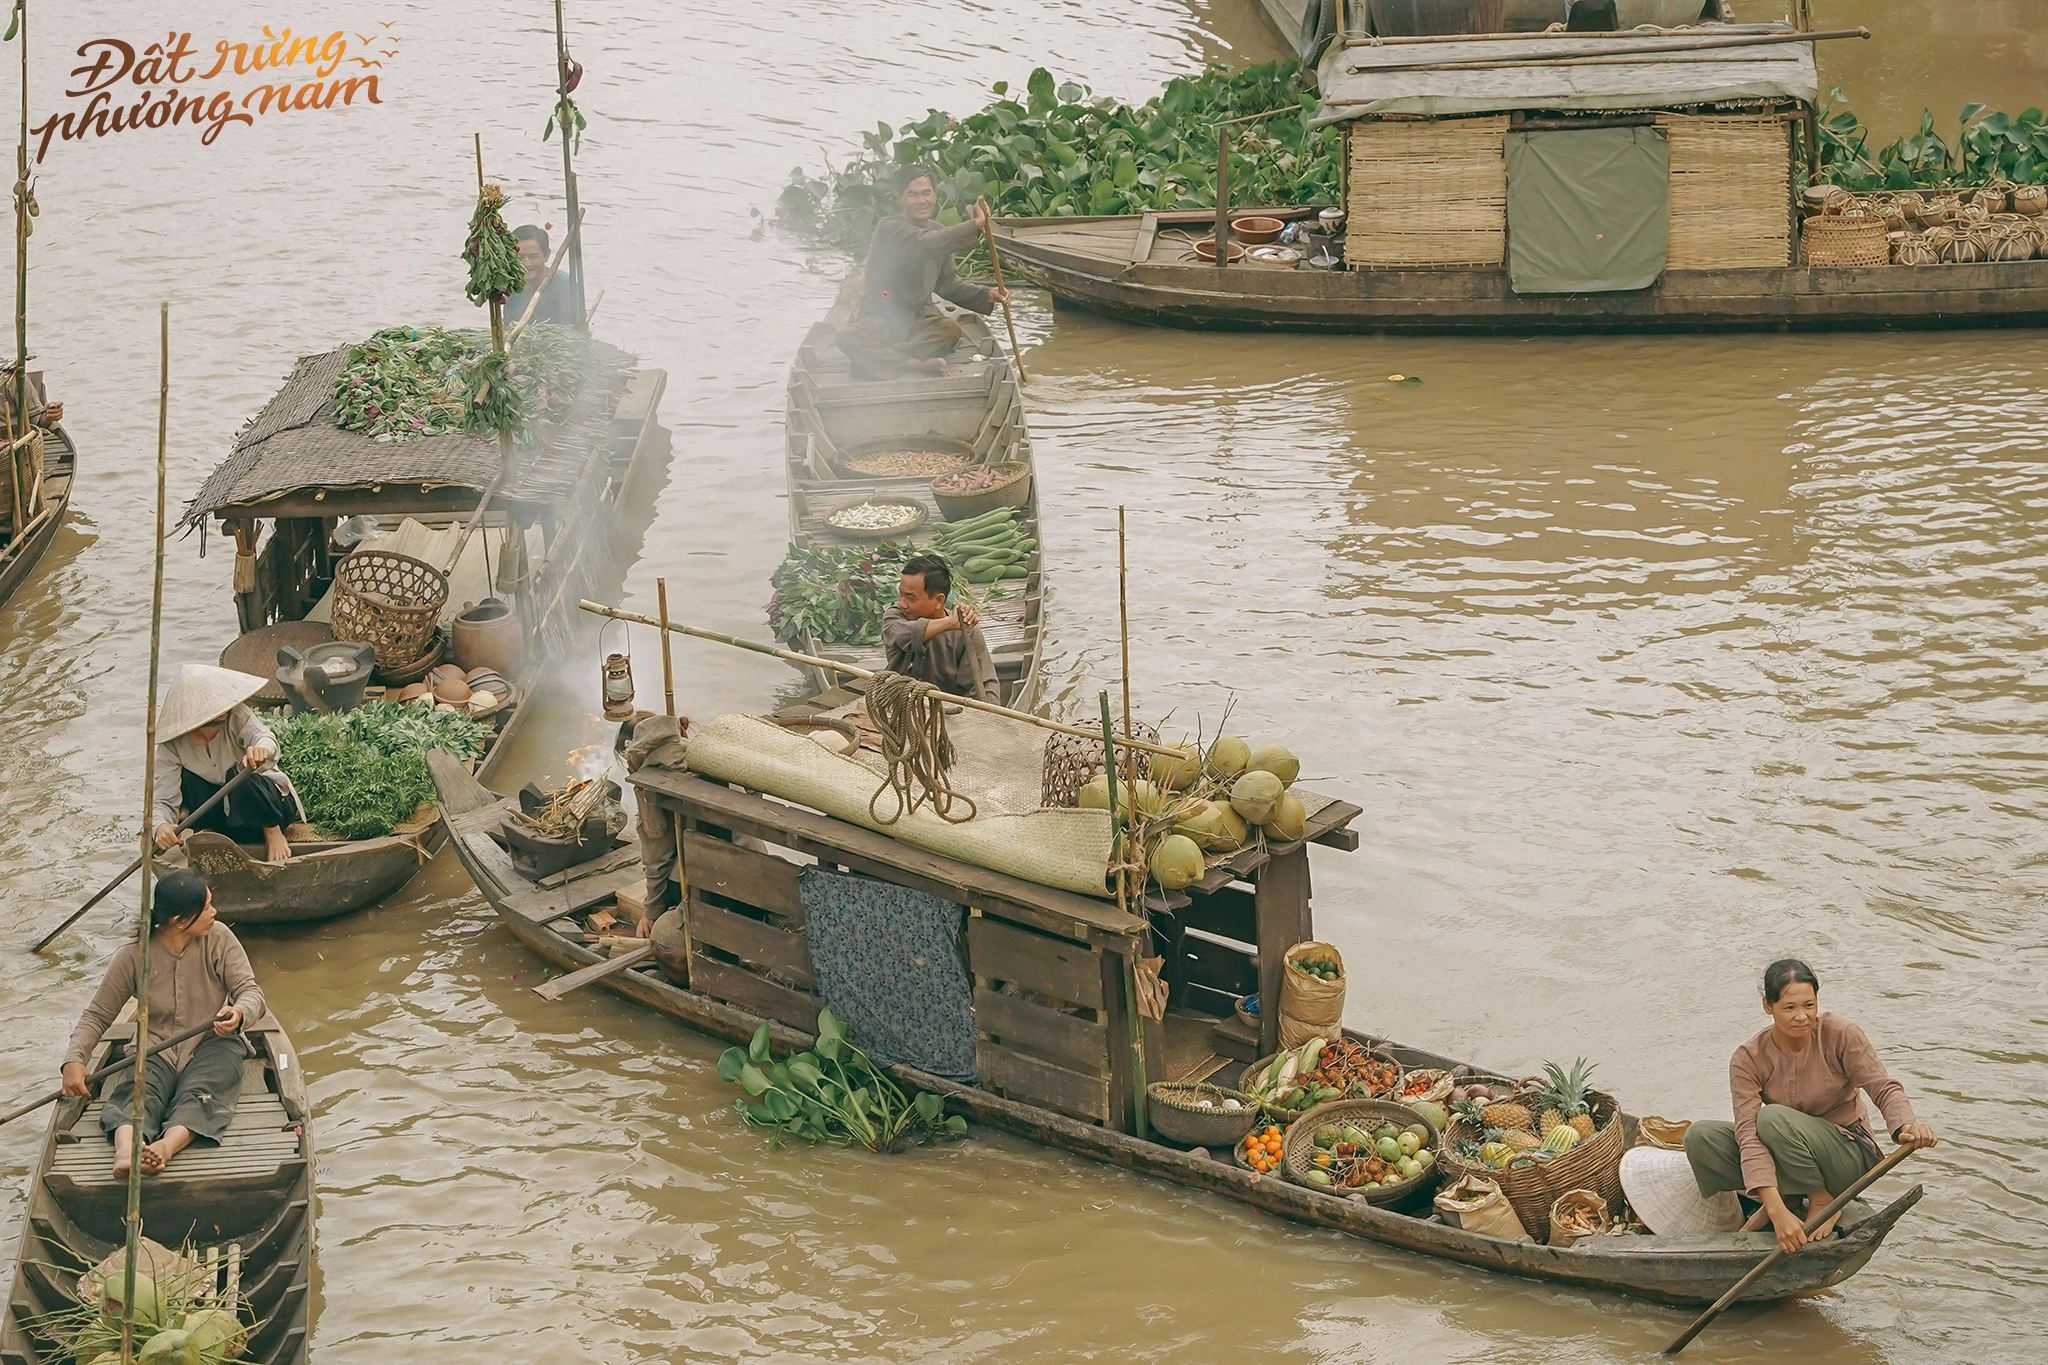 From page to screen: Book-adapted film brings Vietnam’s Mekong Delta to life